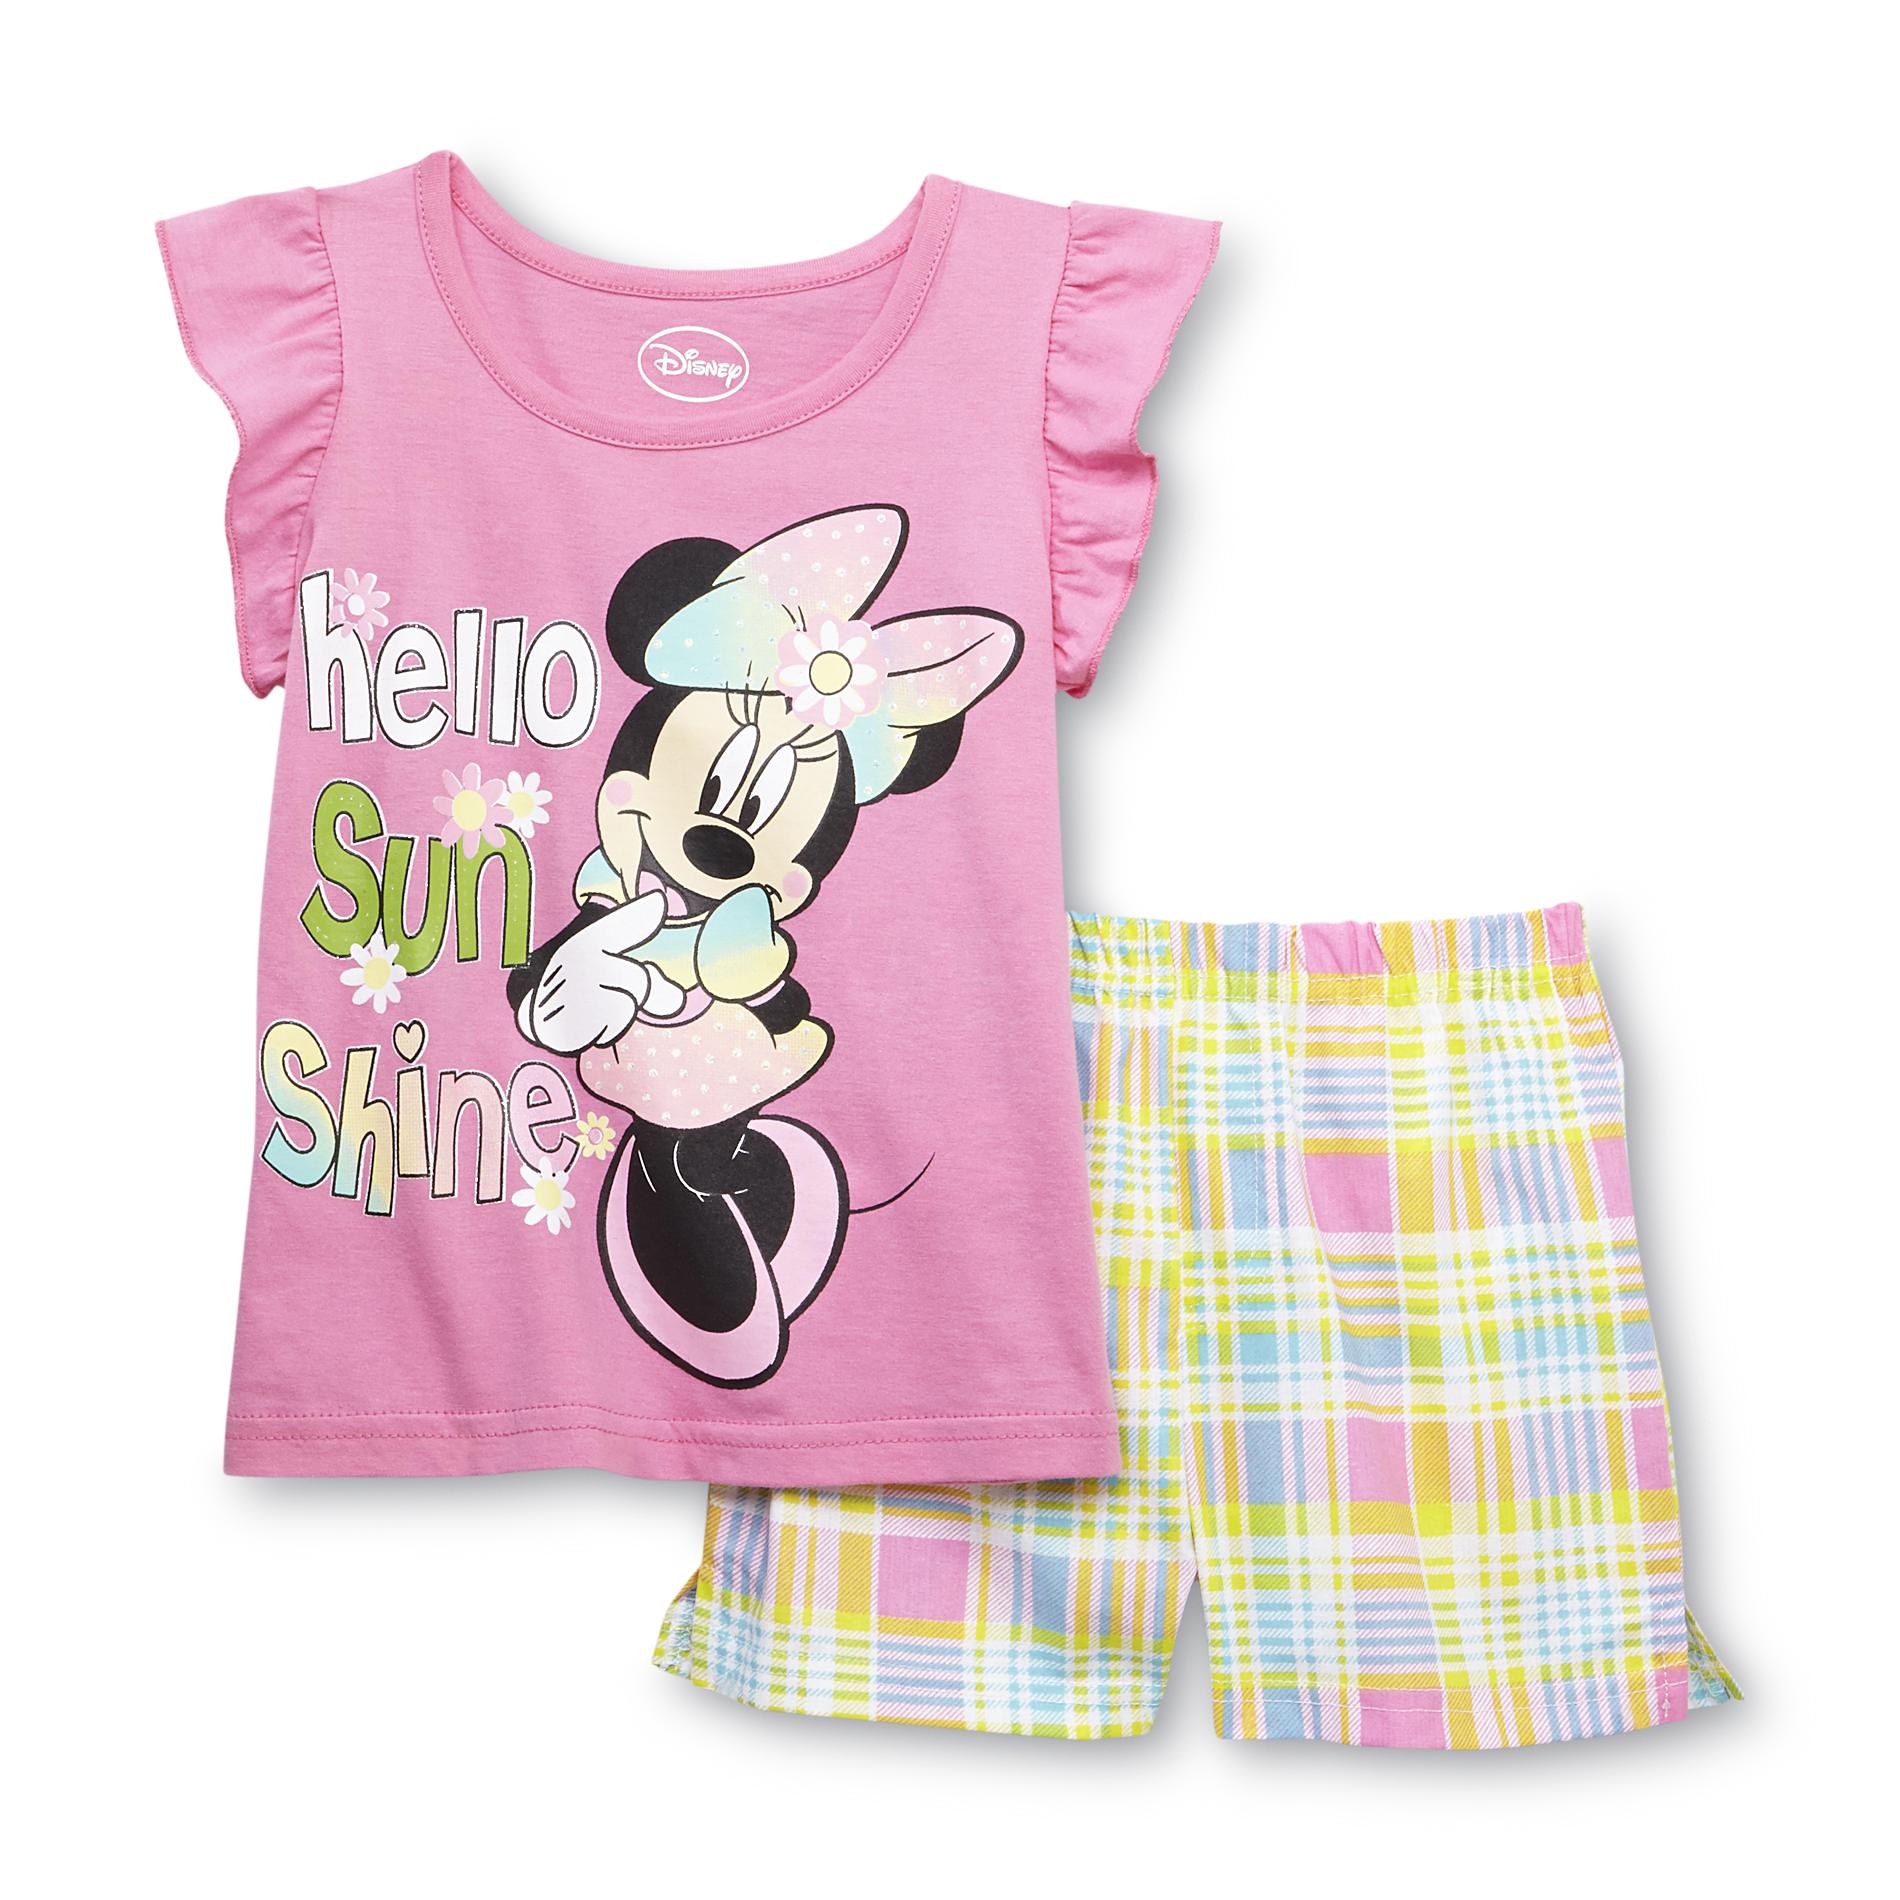 Disney Minnie Mouse Infant & Toddler Girl's Graphic T-Shirt & Shorts